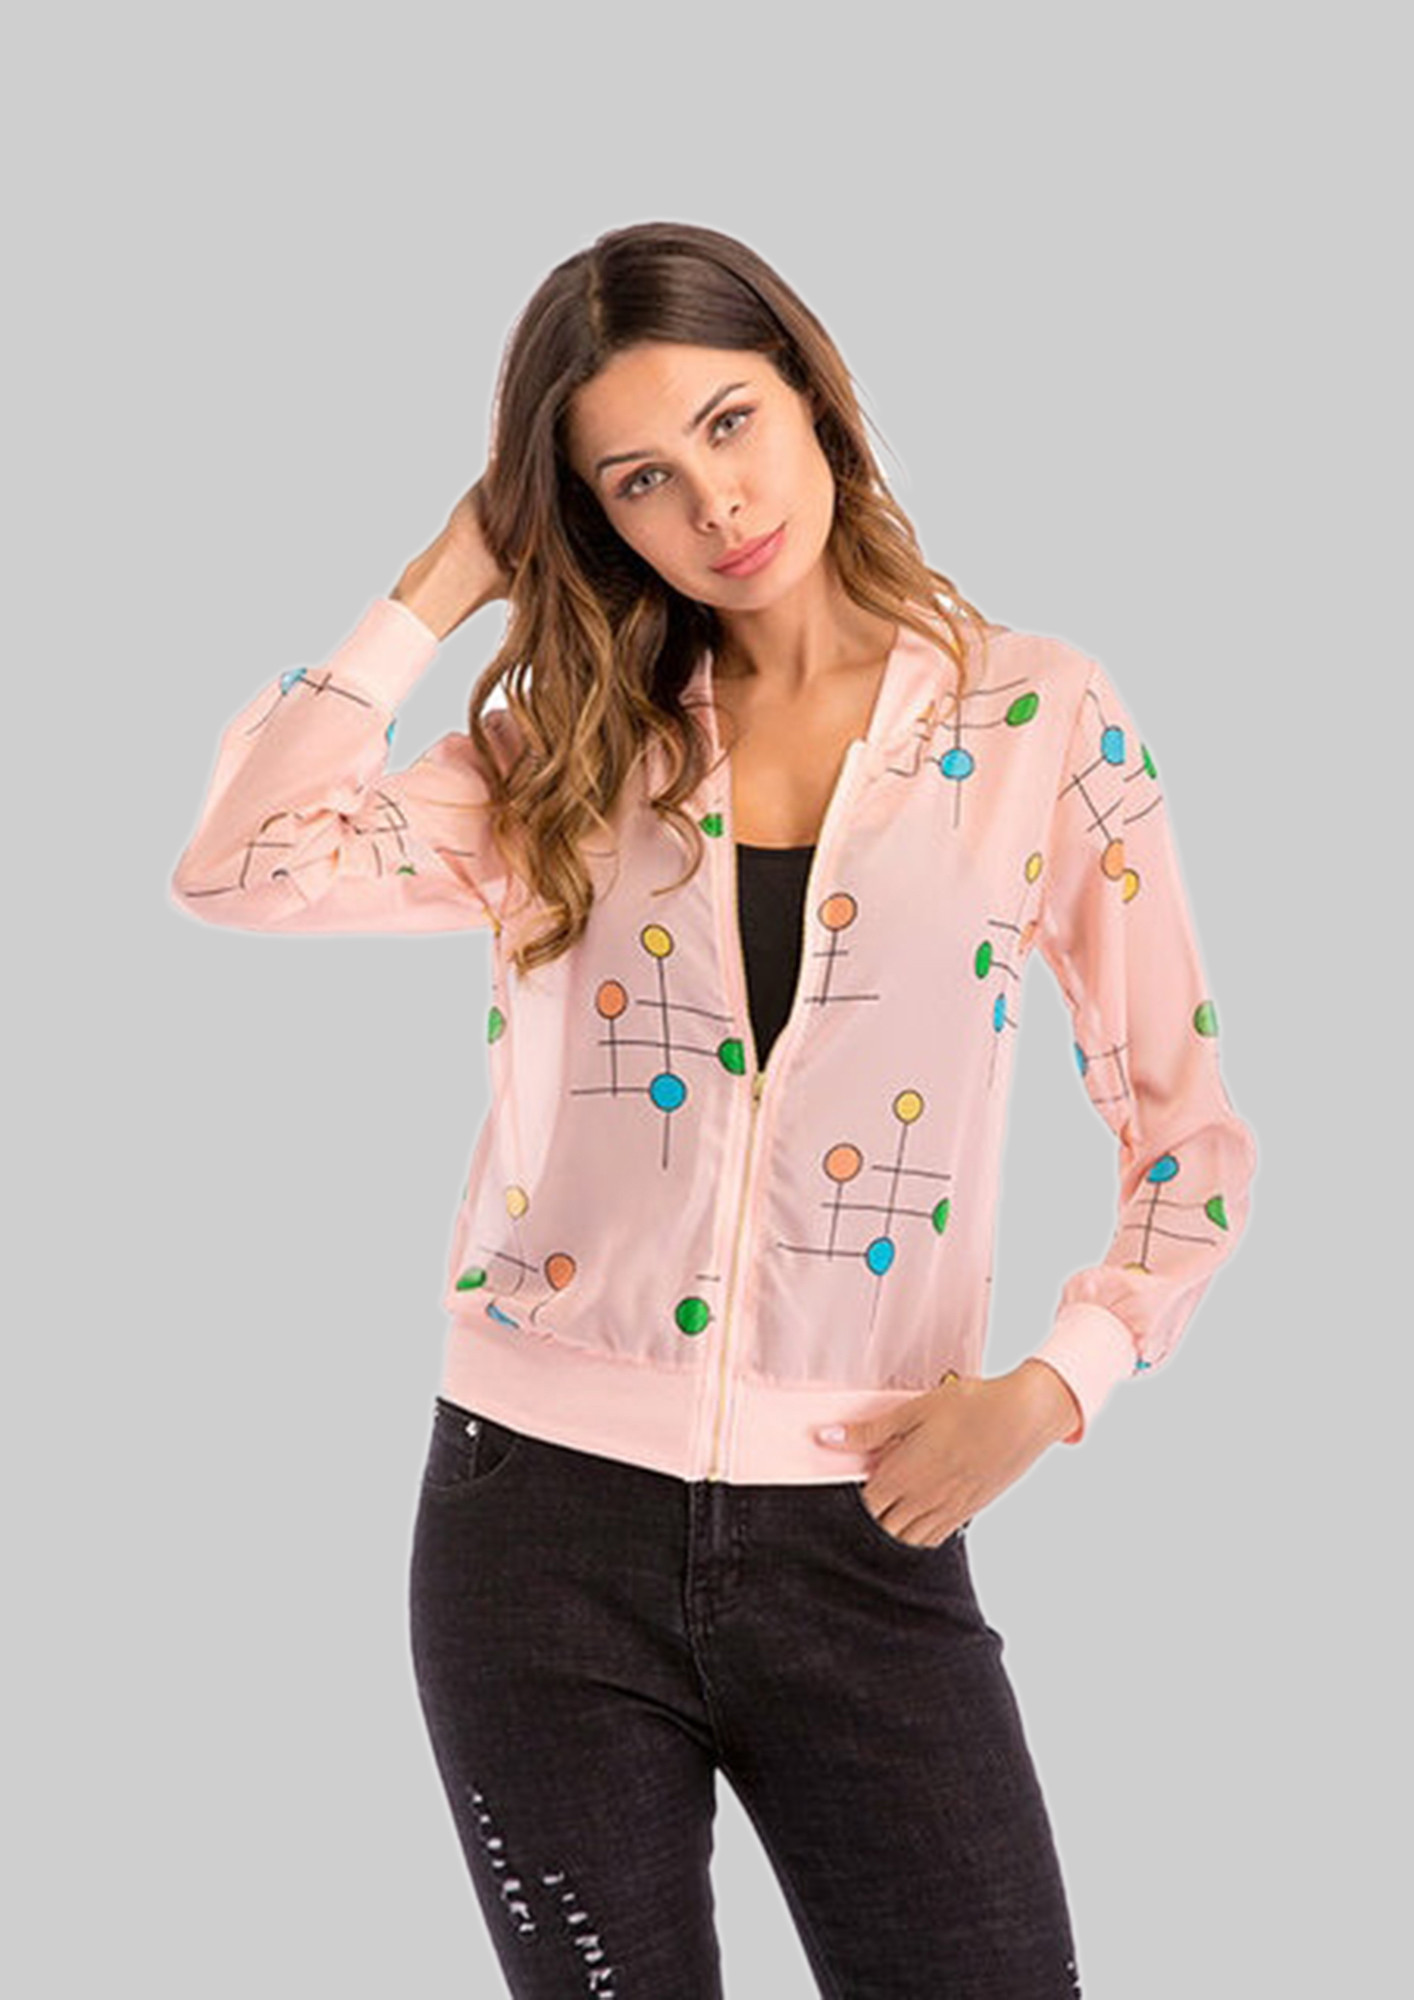 IN A PINK PRINTED ZIPPER CLOSURE BOMBER JACKET